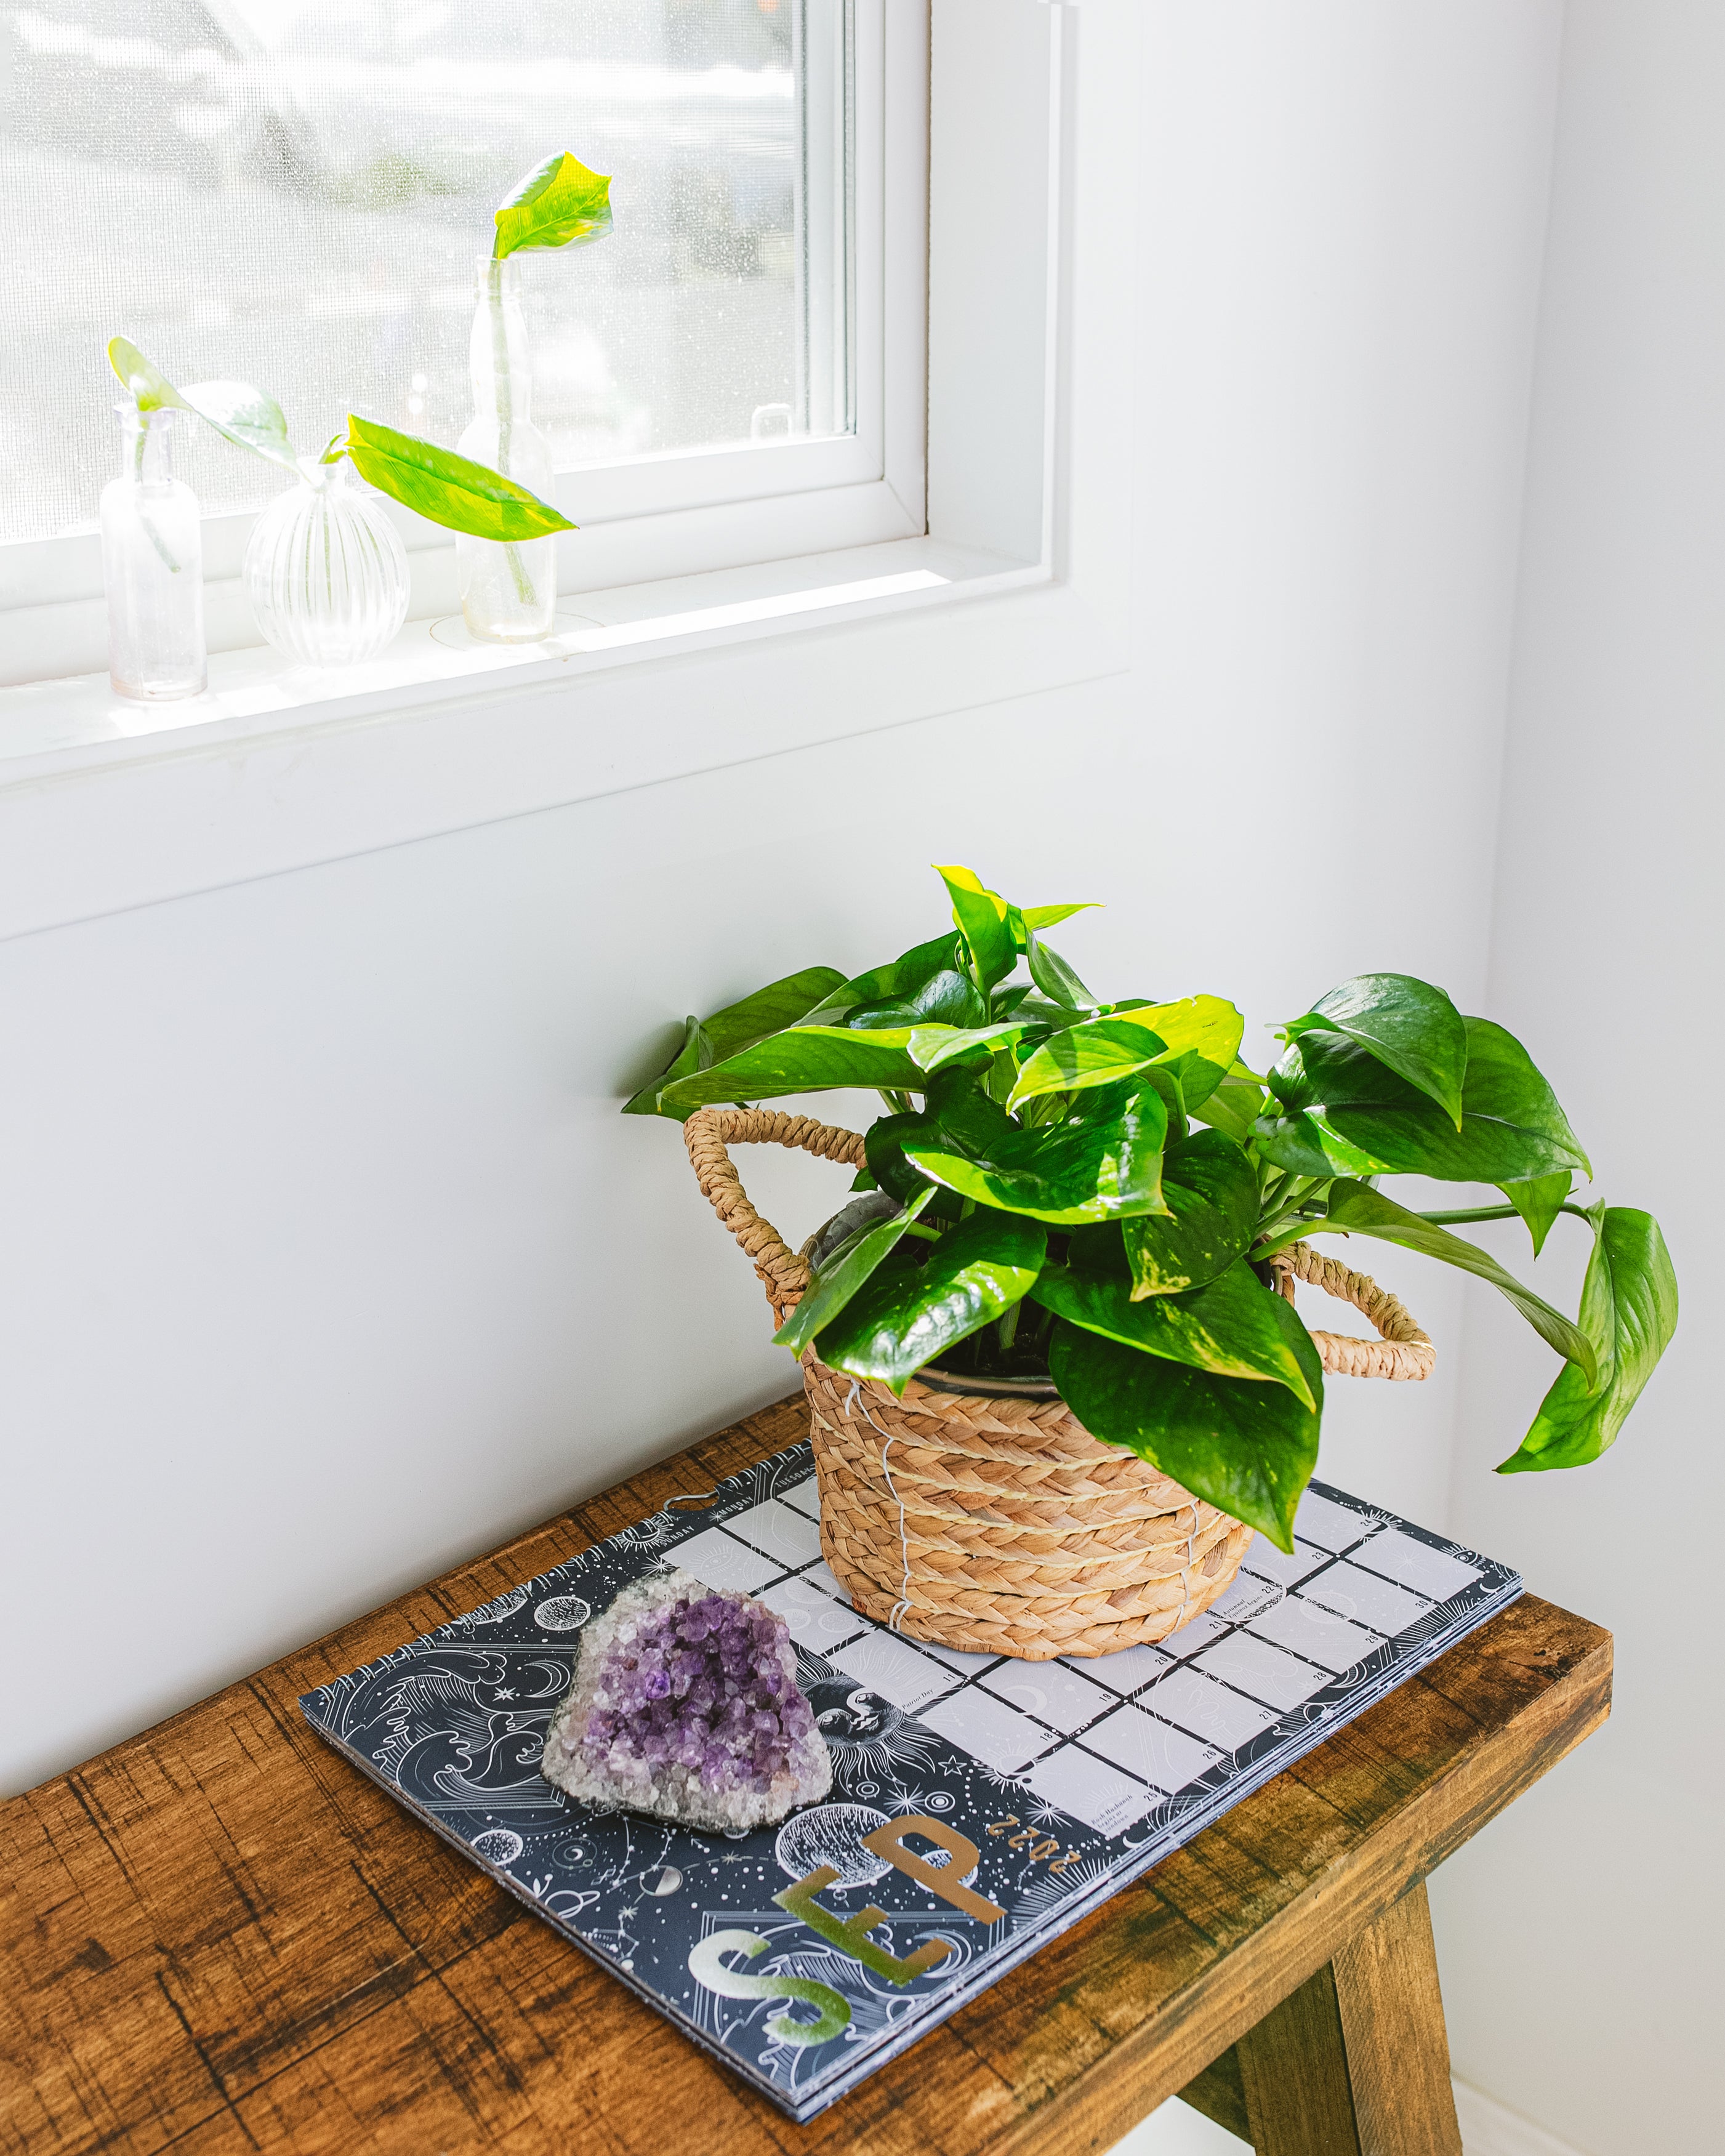 Wish People Luck and Prosperity by Gifting Indoor Plants – unlimitedgreens